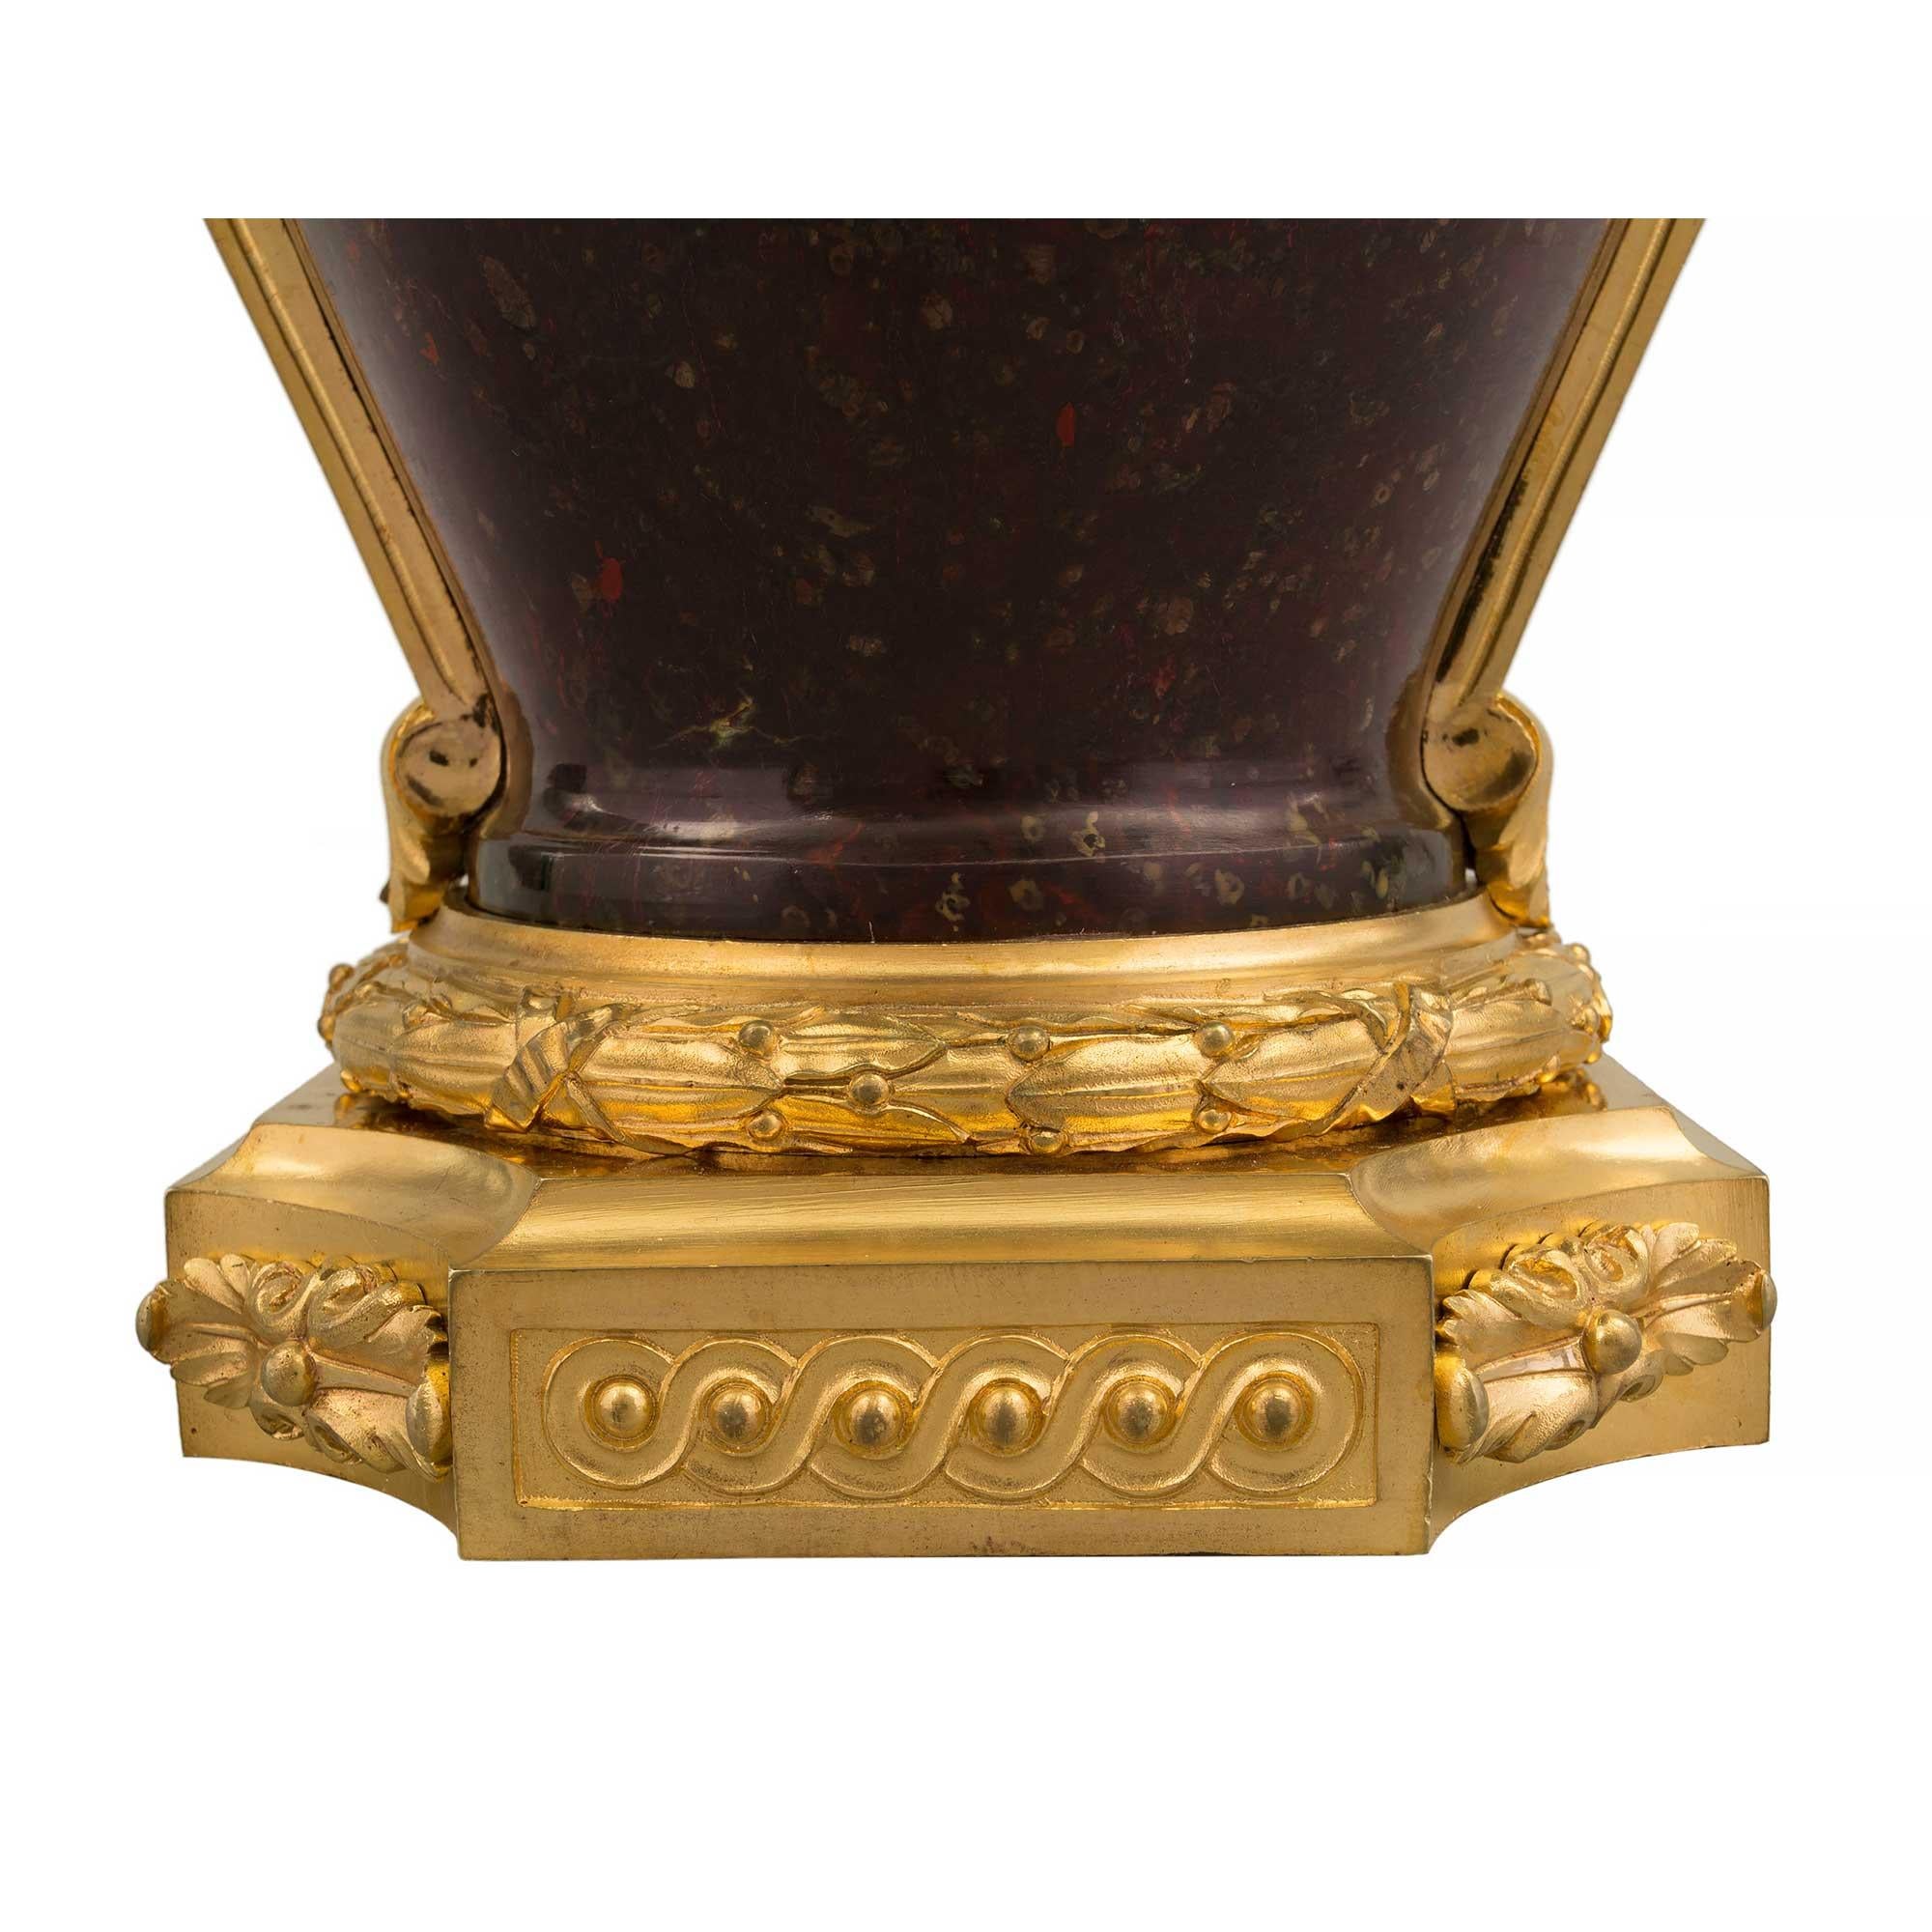 French Early 19th Century Louis XVI Style Porphyry and Ormolu Urns For Sale 5